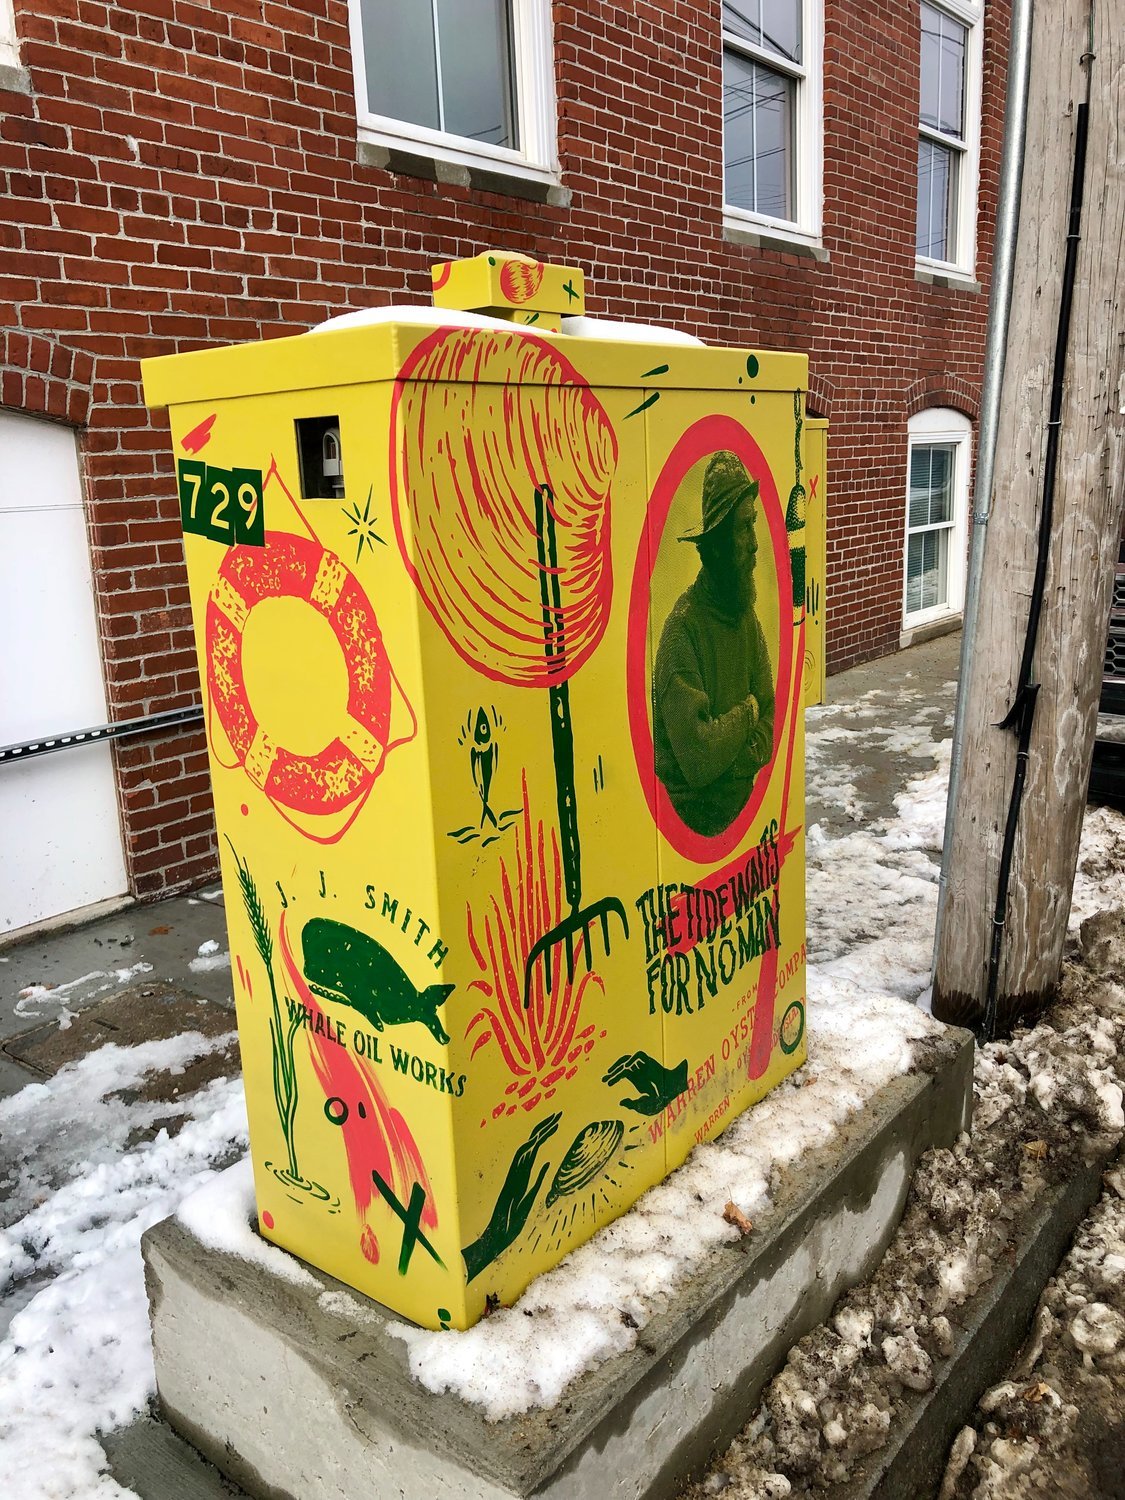 In the first round of public art, Adam Tracy transformed this utility box on Water Street.